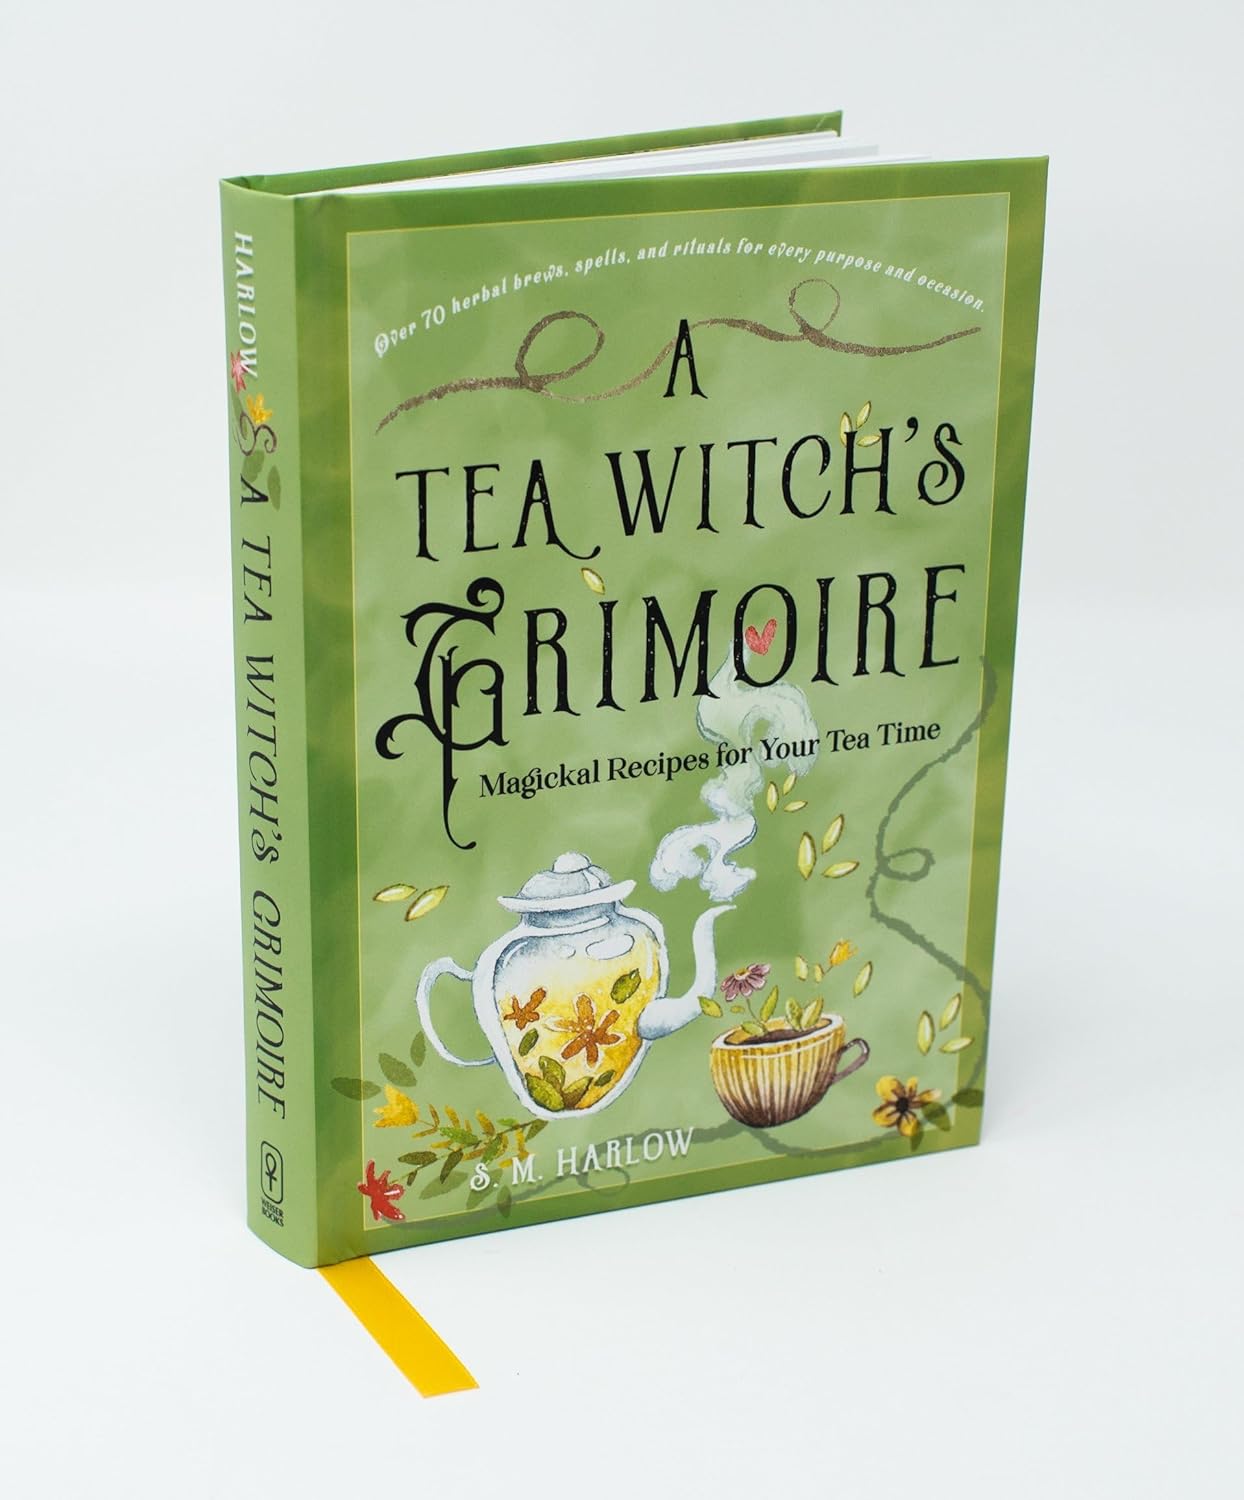 Tea Witch's Grimoire by S M Harlow